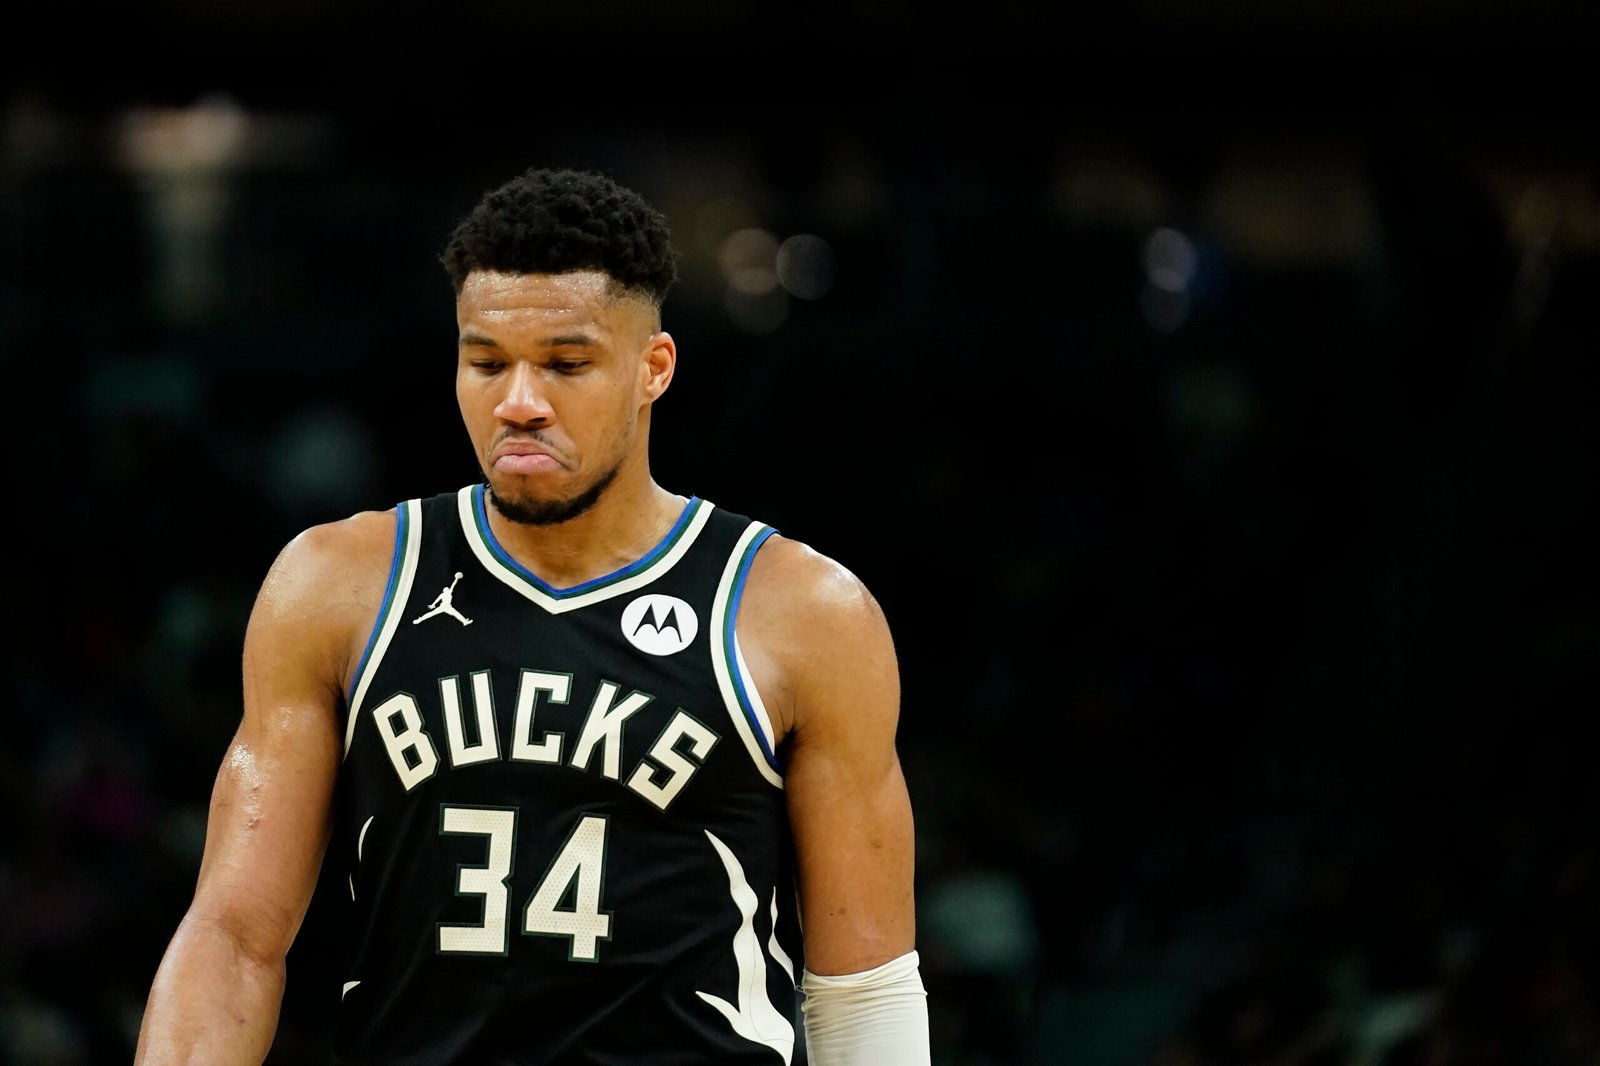 Bucks’ up-and-down season reaching low point just before playoffs